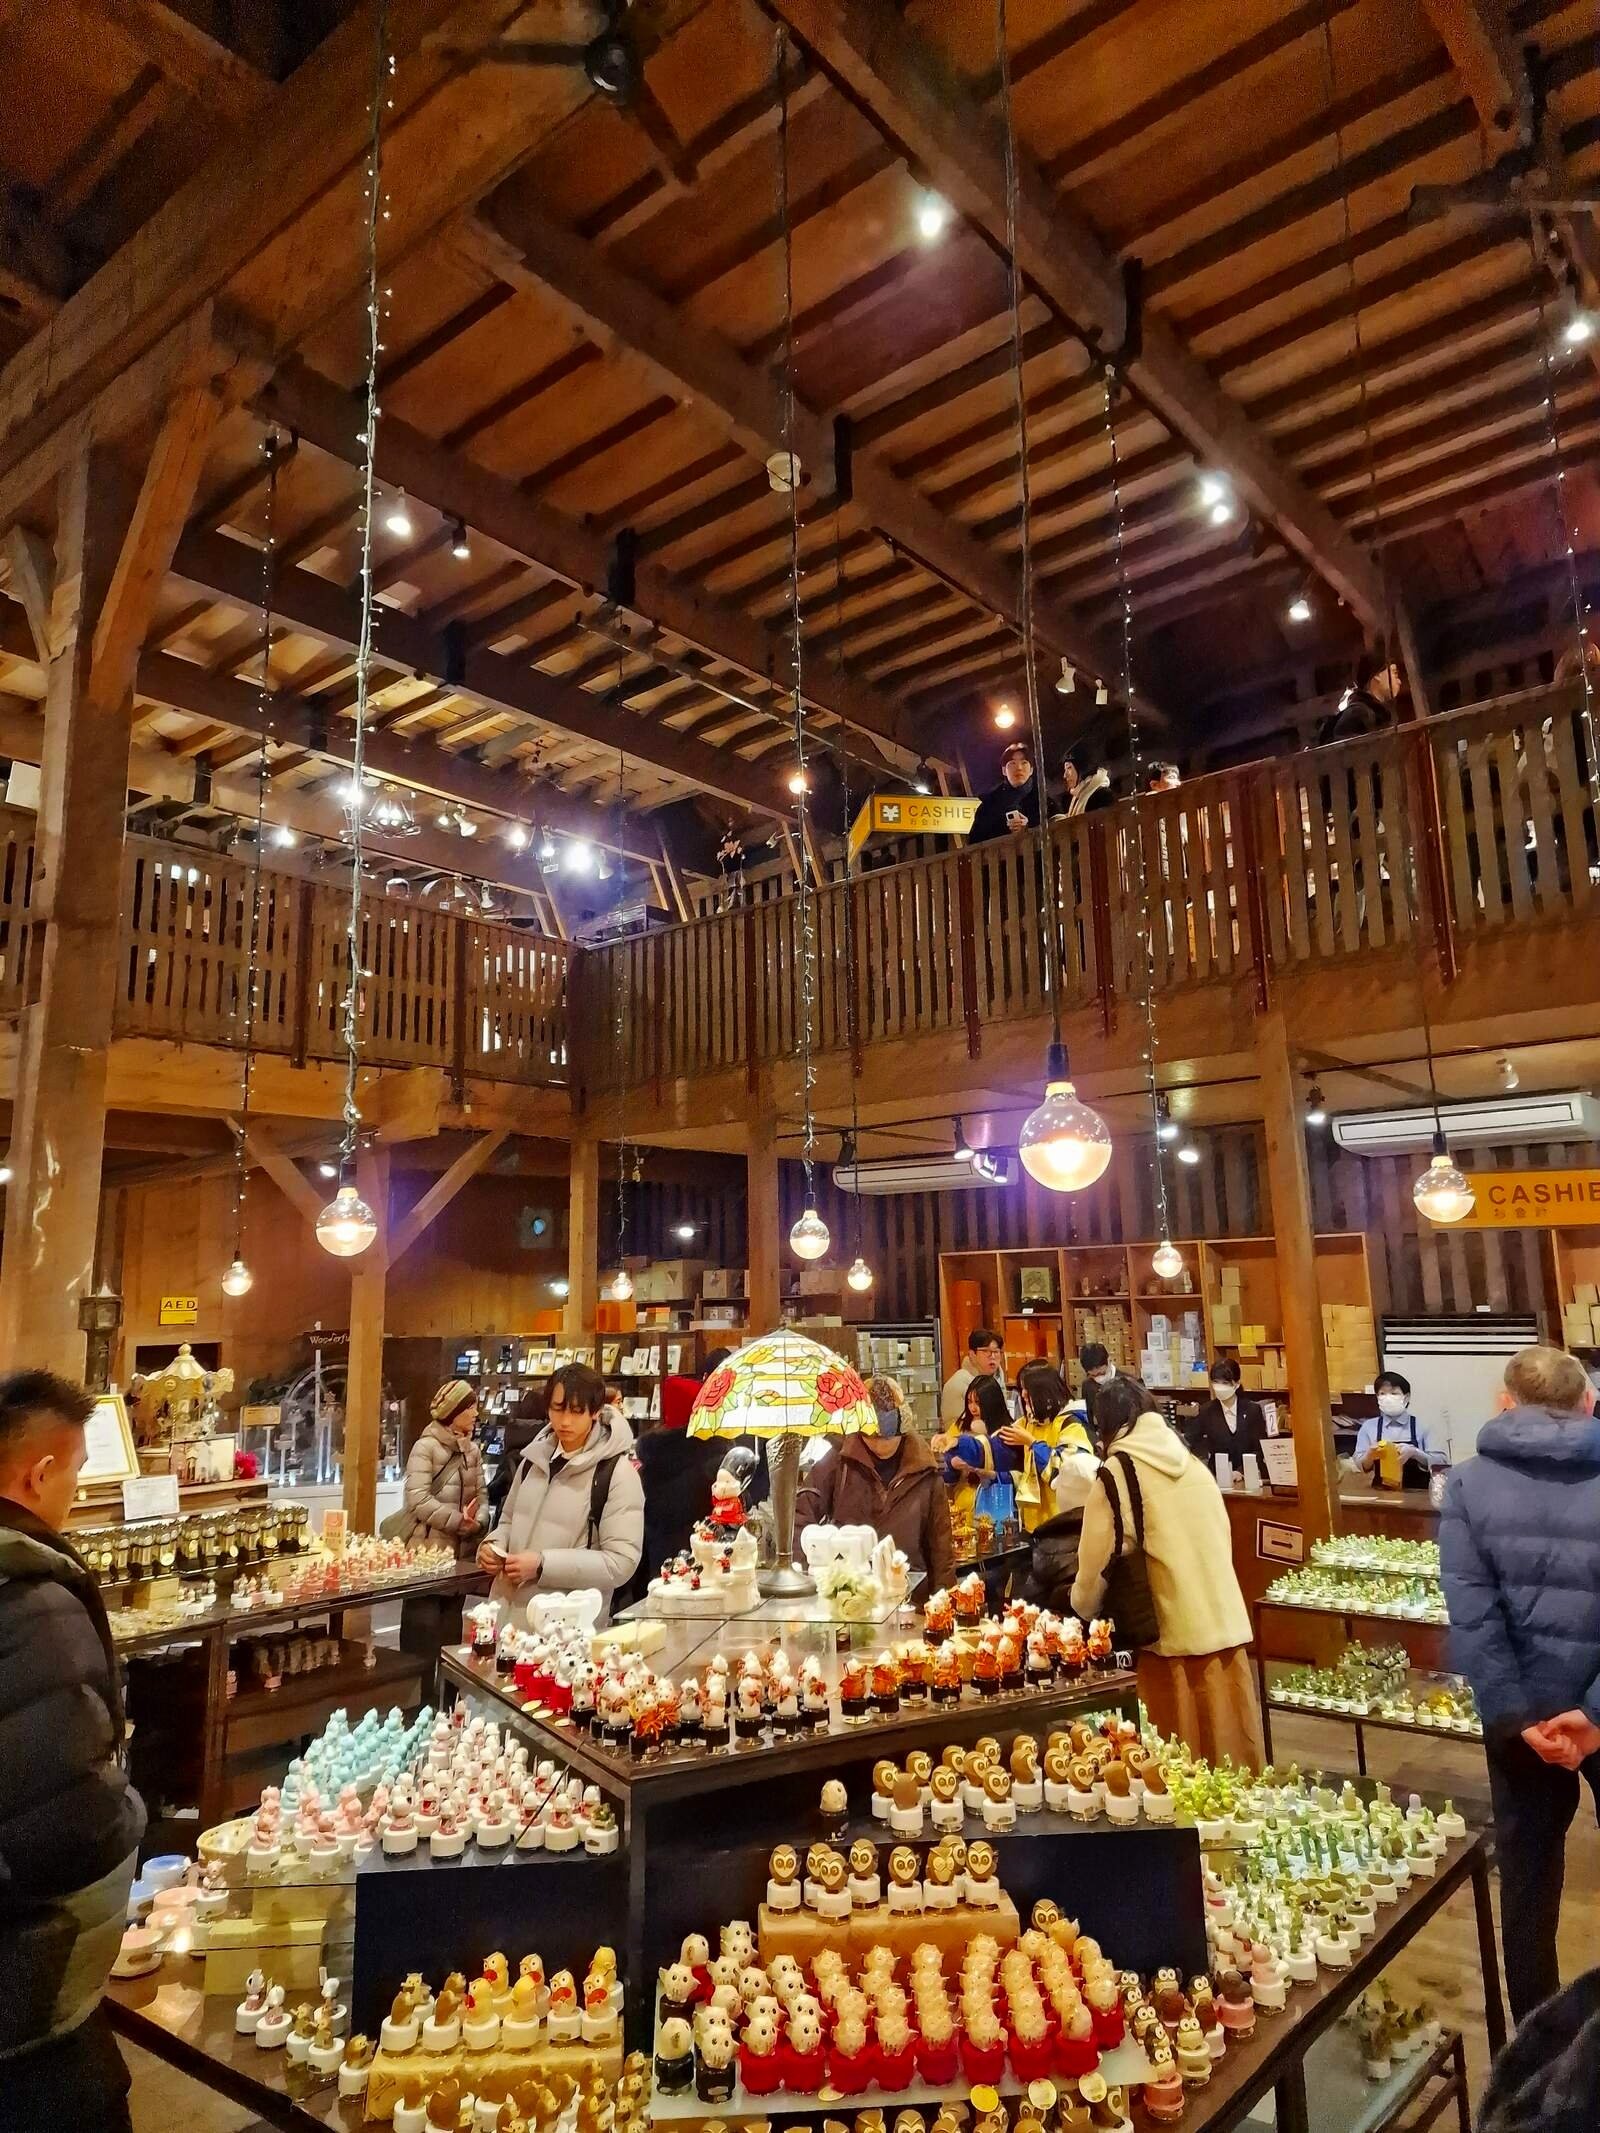 a large wooden room with vaulted ceiling and upper balcony. Large shop displays with people milling around the tables with small products on